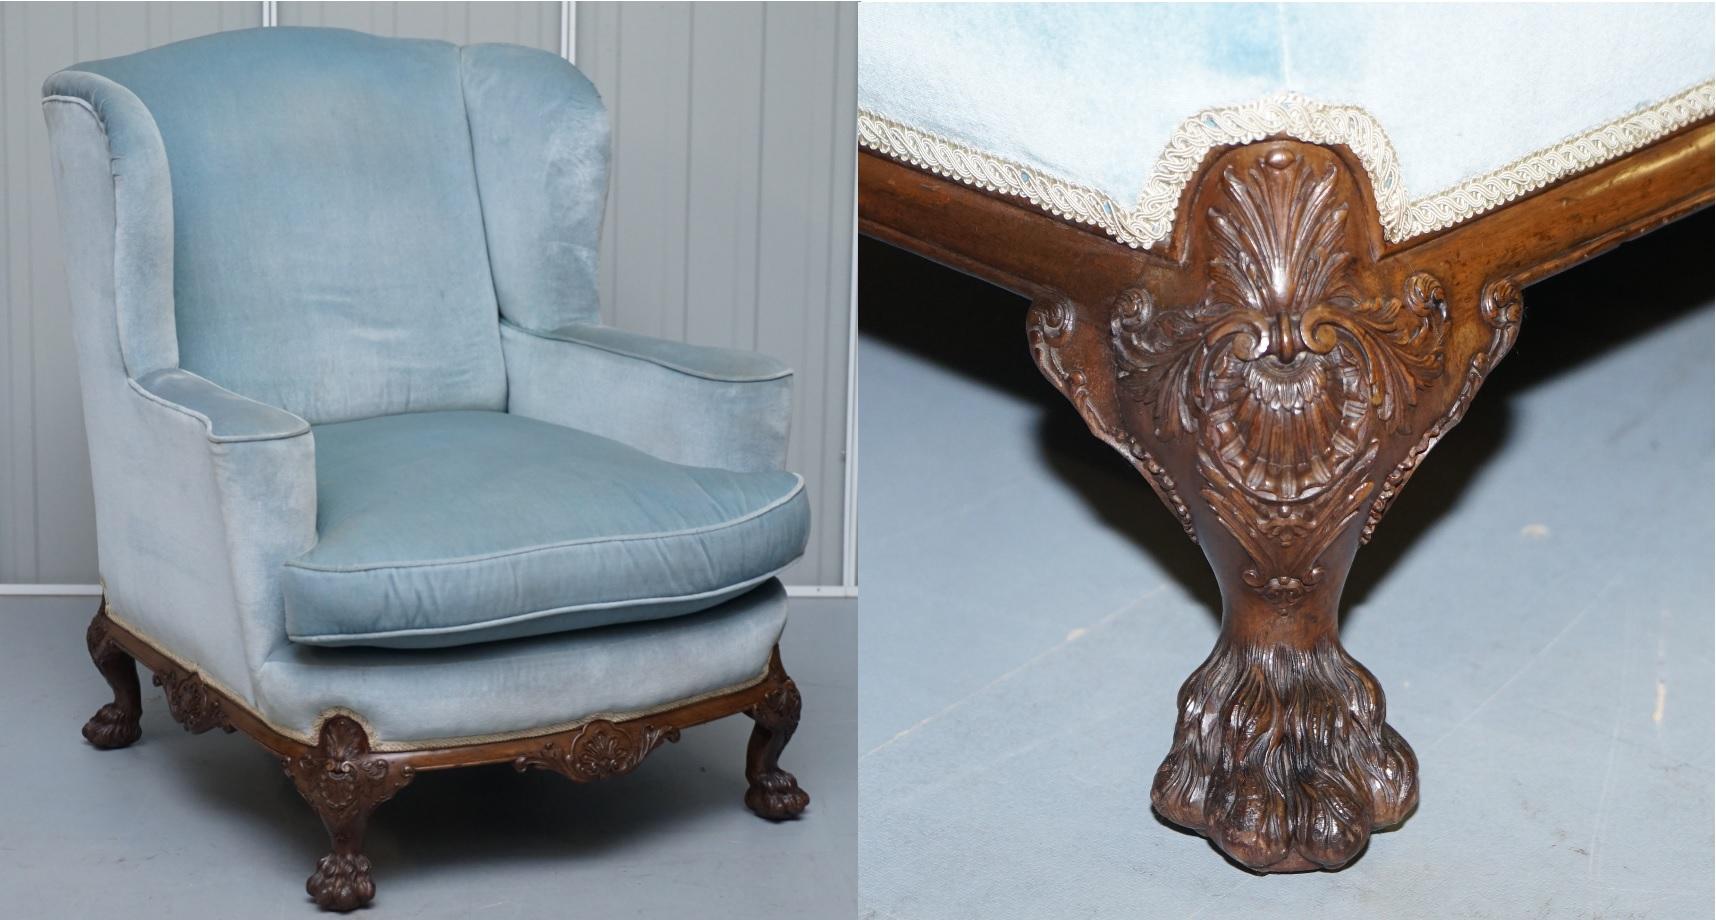 We are delighted to offer for sale this lovely hand made in England antique Victorian armchair with heavily carved Lion’s hairy paw feet in the George II style

This chair is really a statement piece, the solid walnut frame is hand carved all